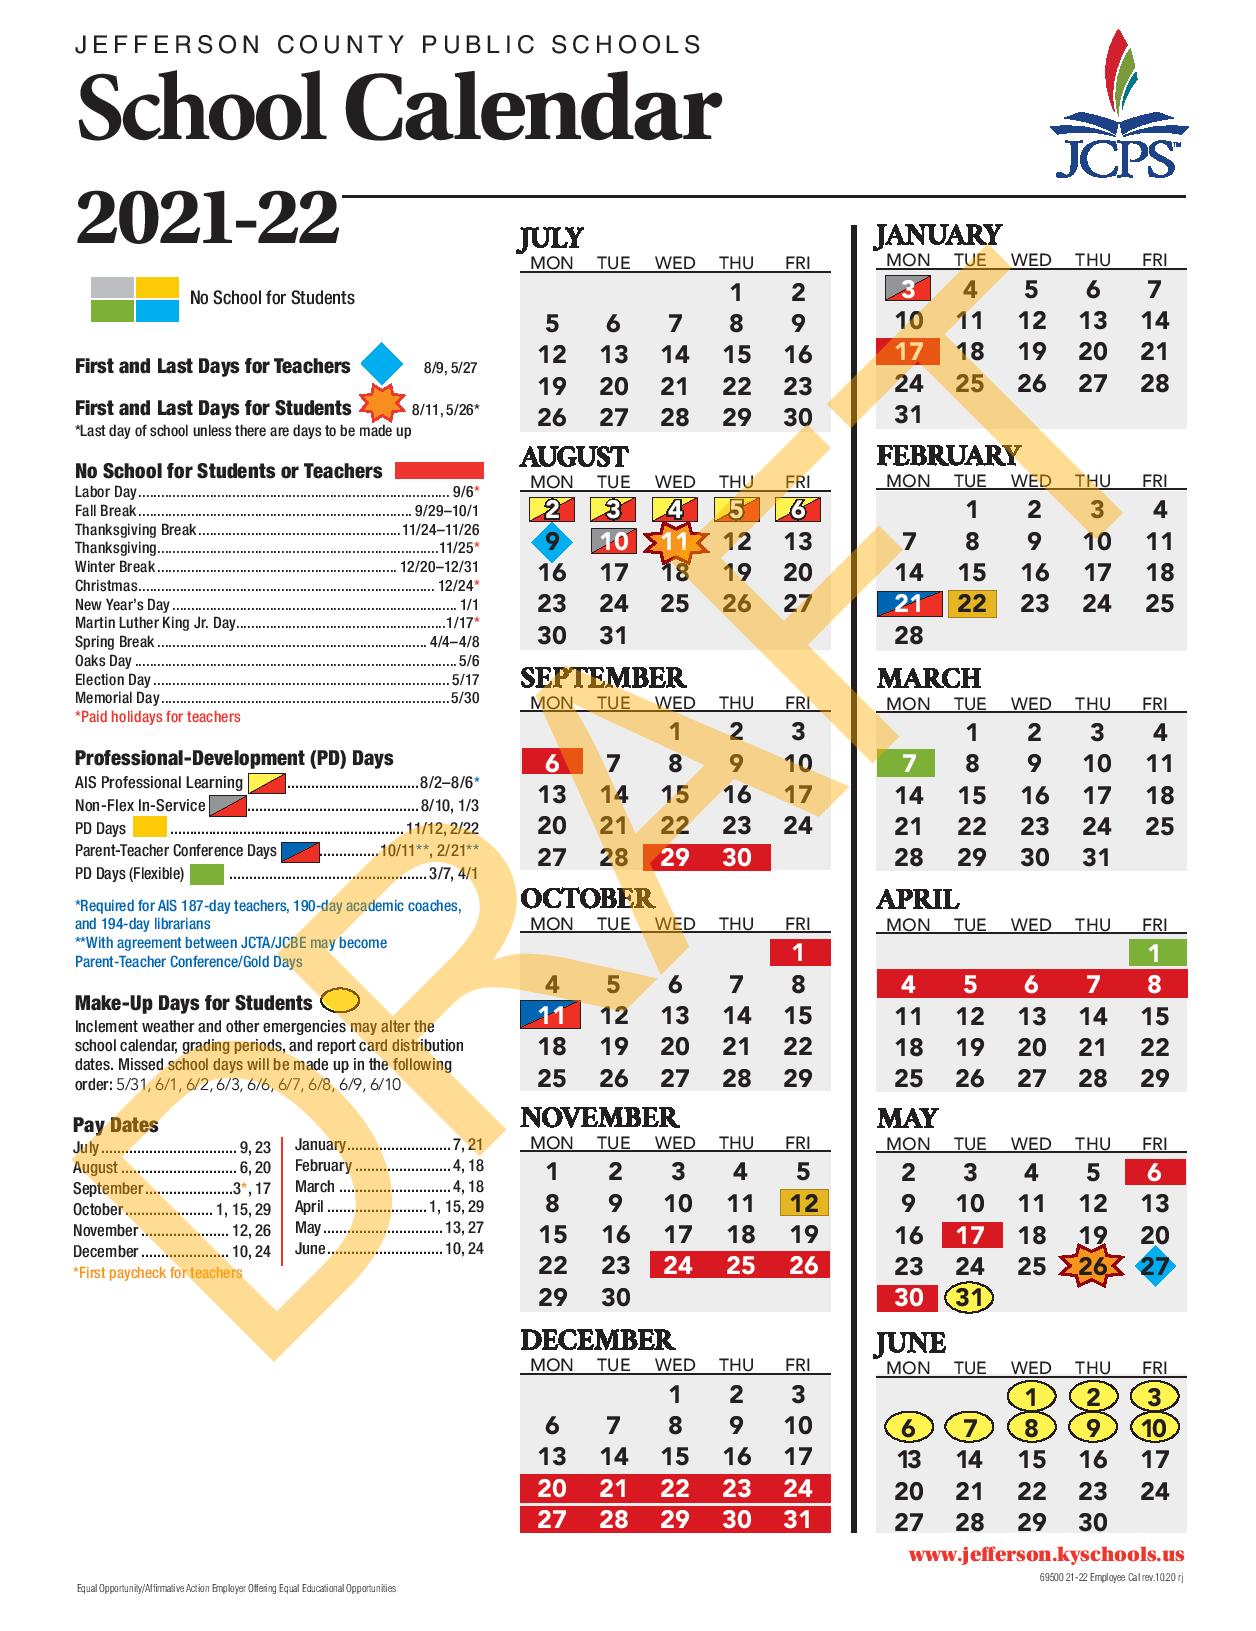 2022 23 Jcps Calendar Jcps On Twitter: "🗓️ The Board Approved The 2021-2022 School Calendar.  Highlights Include A Mid-August Start Date, A Fall Break In Late September  & Early October, A Winter Break, A Spring Break,